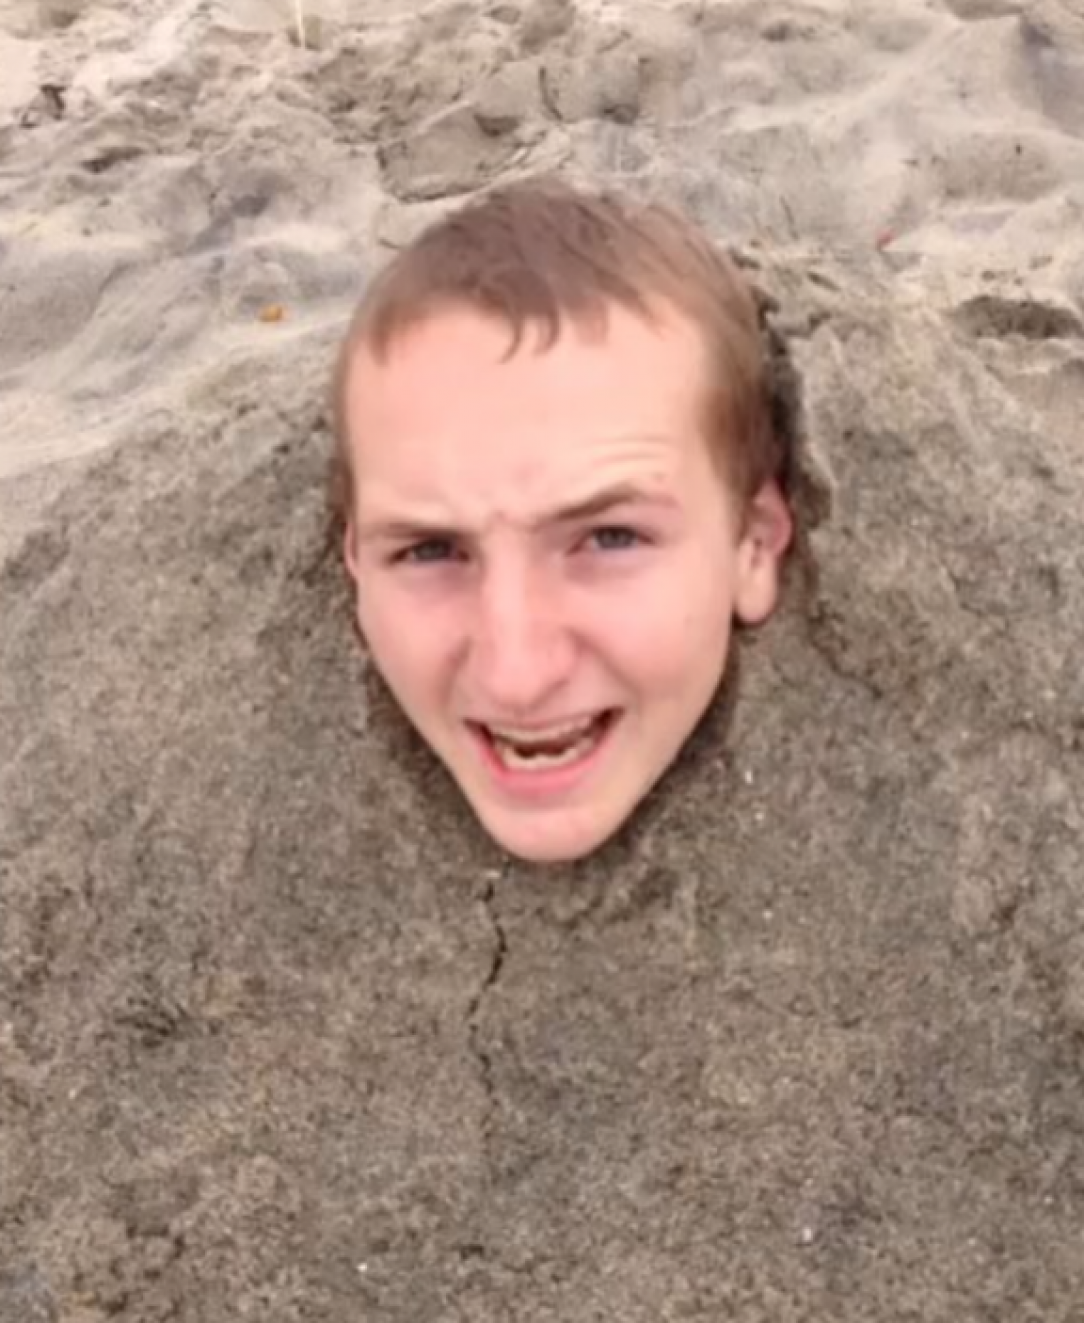 Sand guardian, guardian of the sand